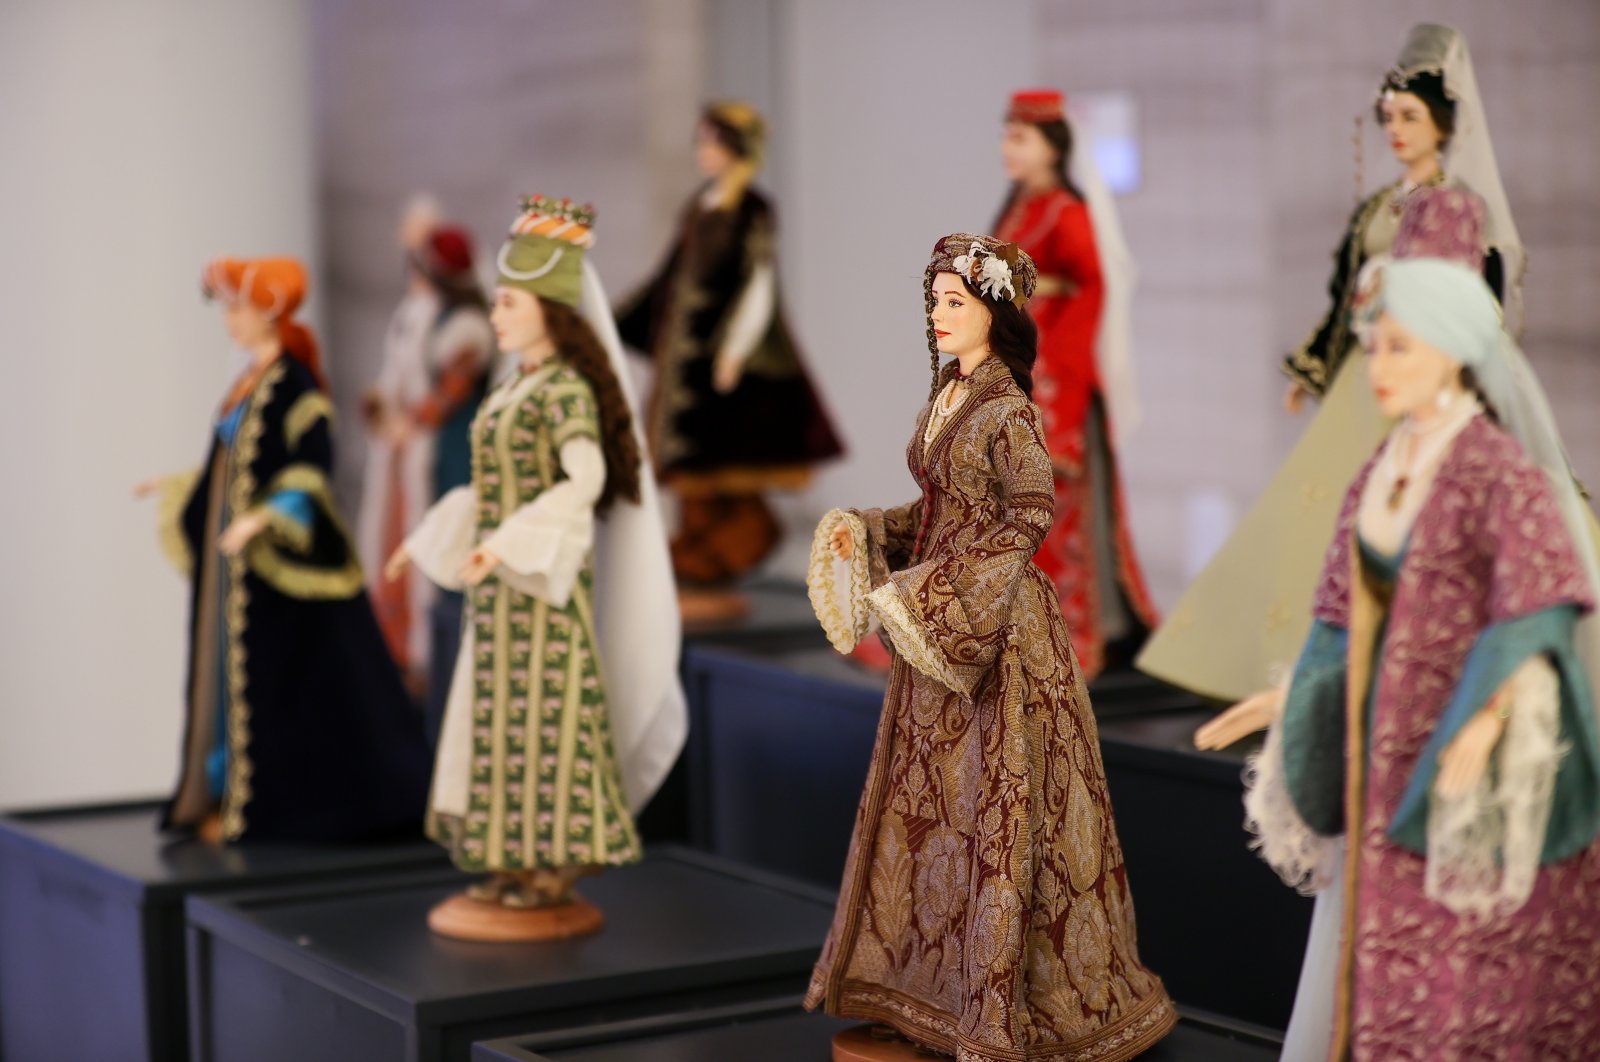 The "Lady Sultans" exhibition was held in the Turkish House (Türkevi), hosted by the New York Consulate General, with the participation of Üsküdar Mayor Hilmi Türkmen, New York, U.S., April 16, 2022. (AA Photo)